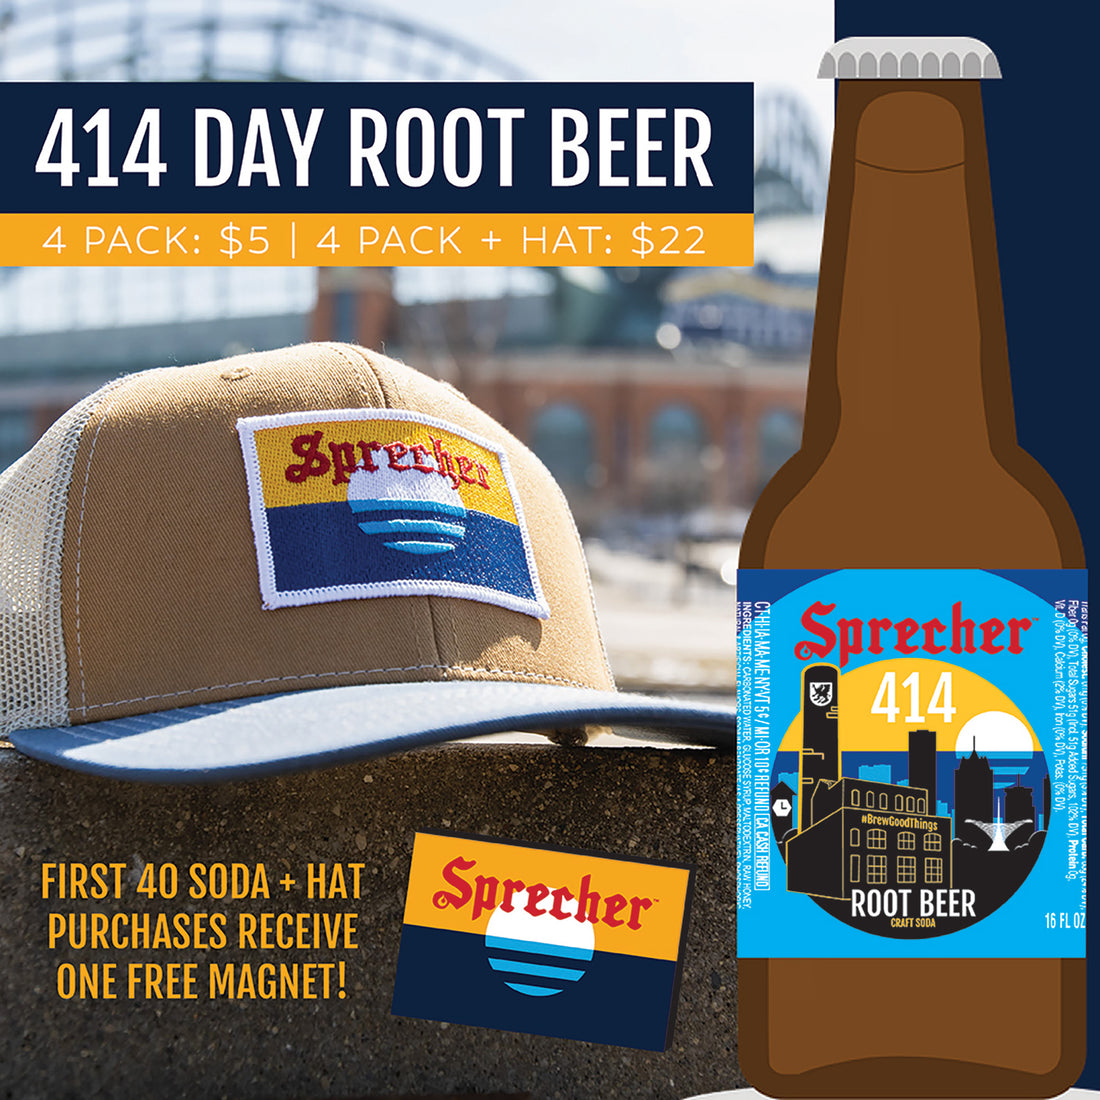 414 Day Tour and Gift Shop Deals